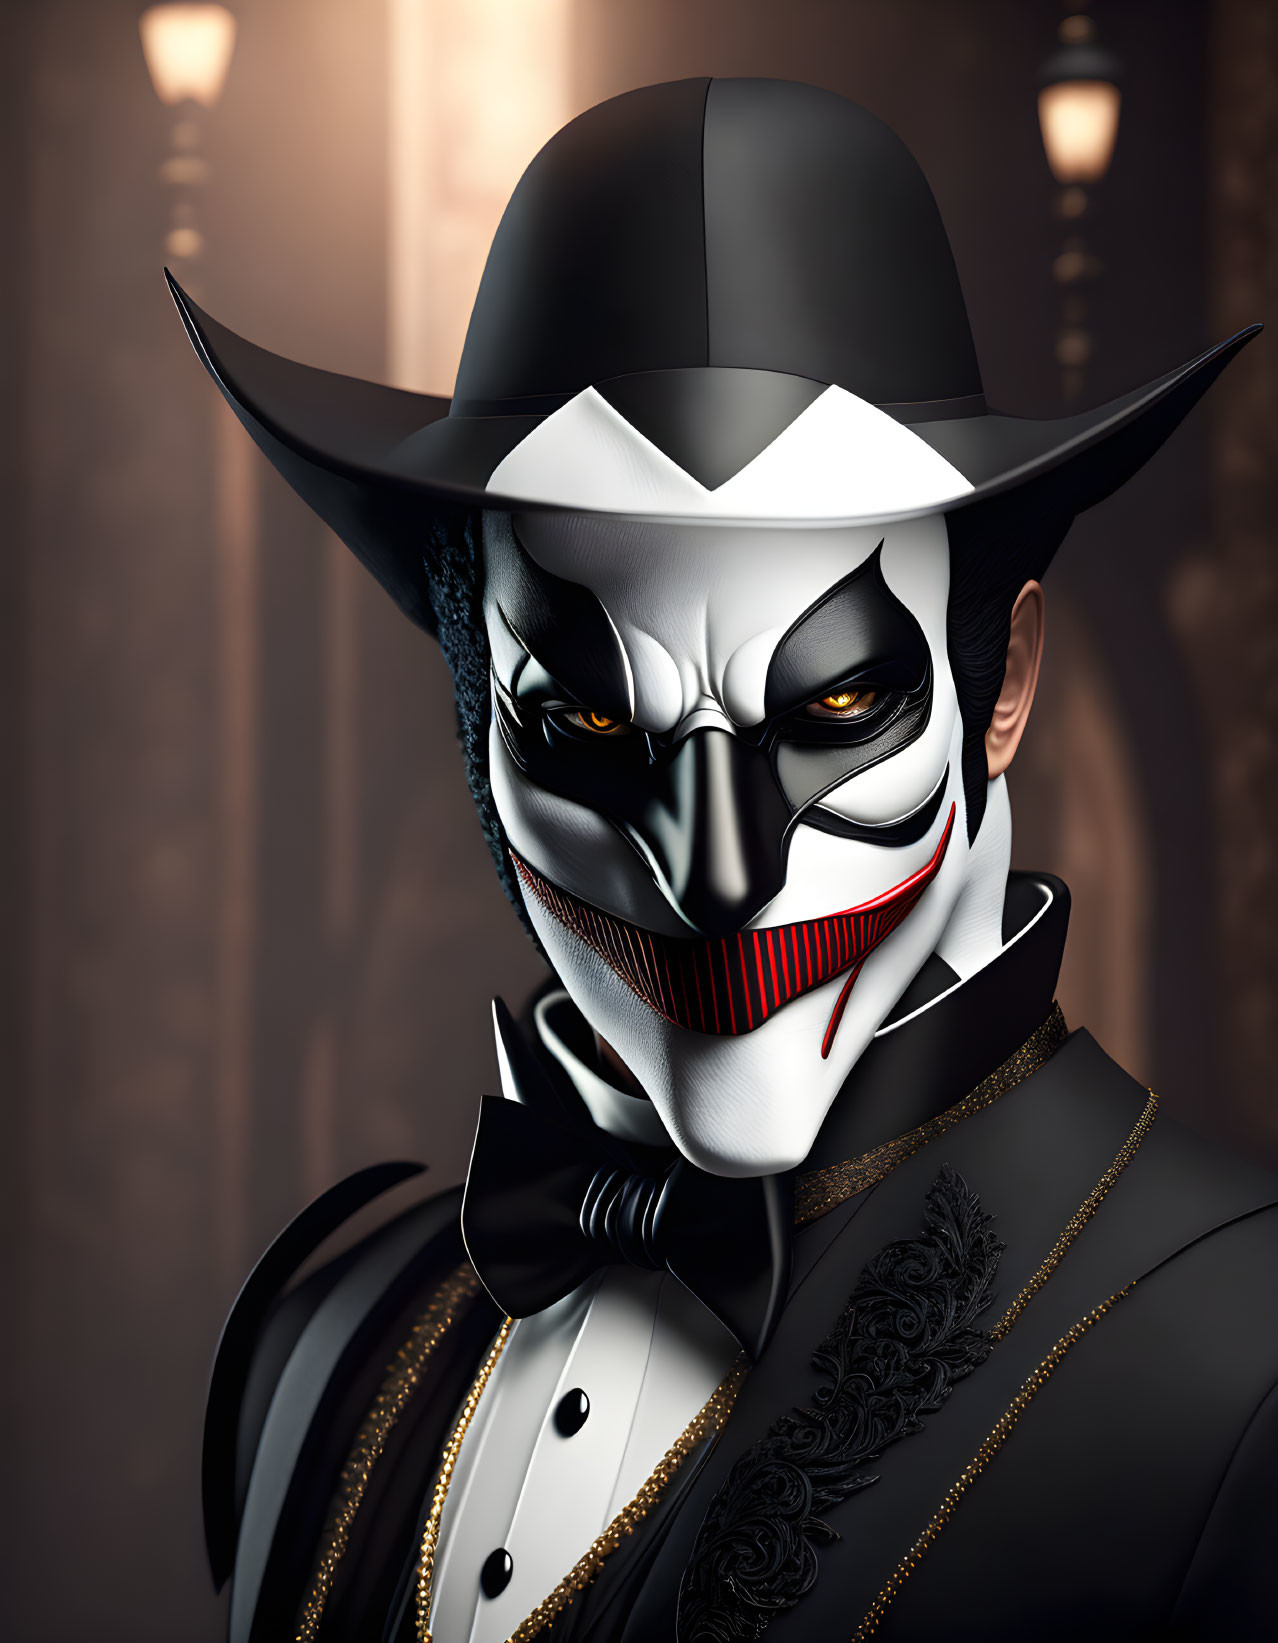 Character illustration: Cowboy hat, black mask with red accents, tuxedo, bow tie